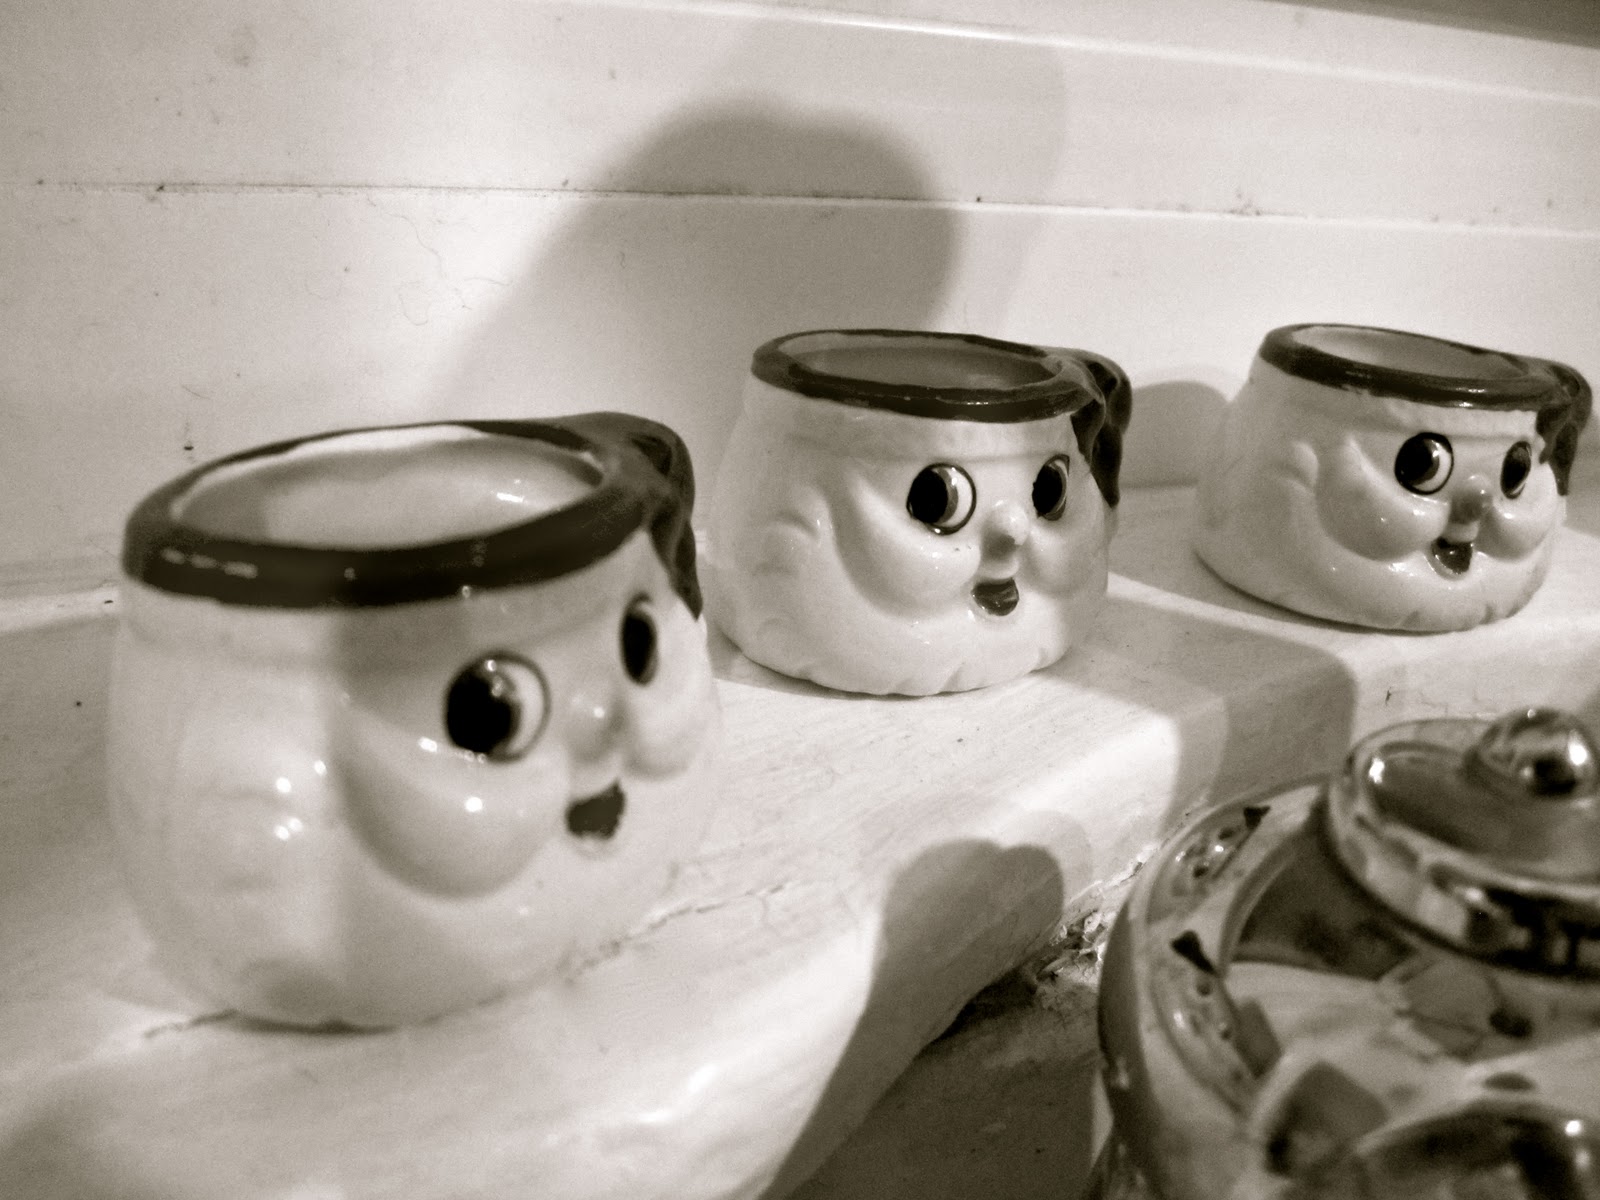 These cute little antique Santa mugs finish the look!